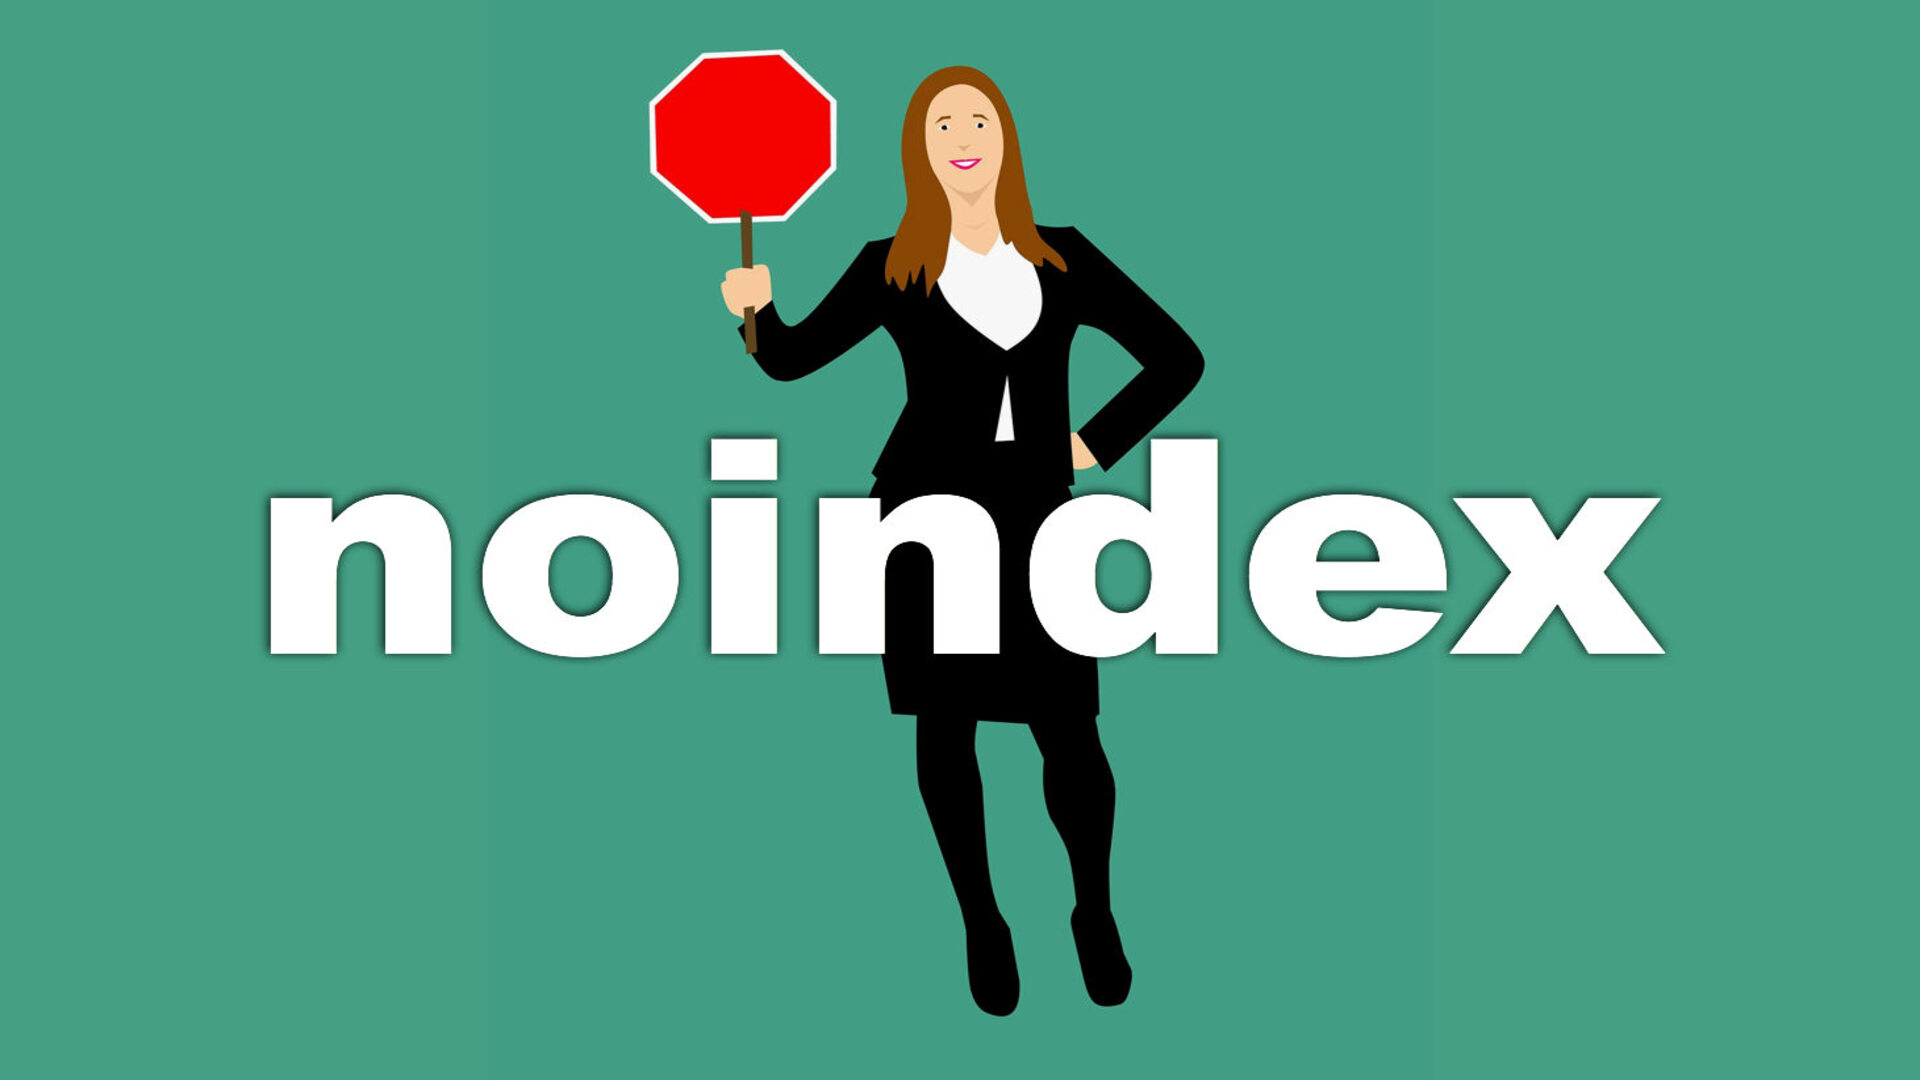 What is noindex, and why is it needed?